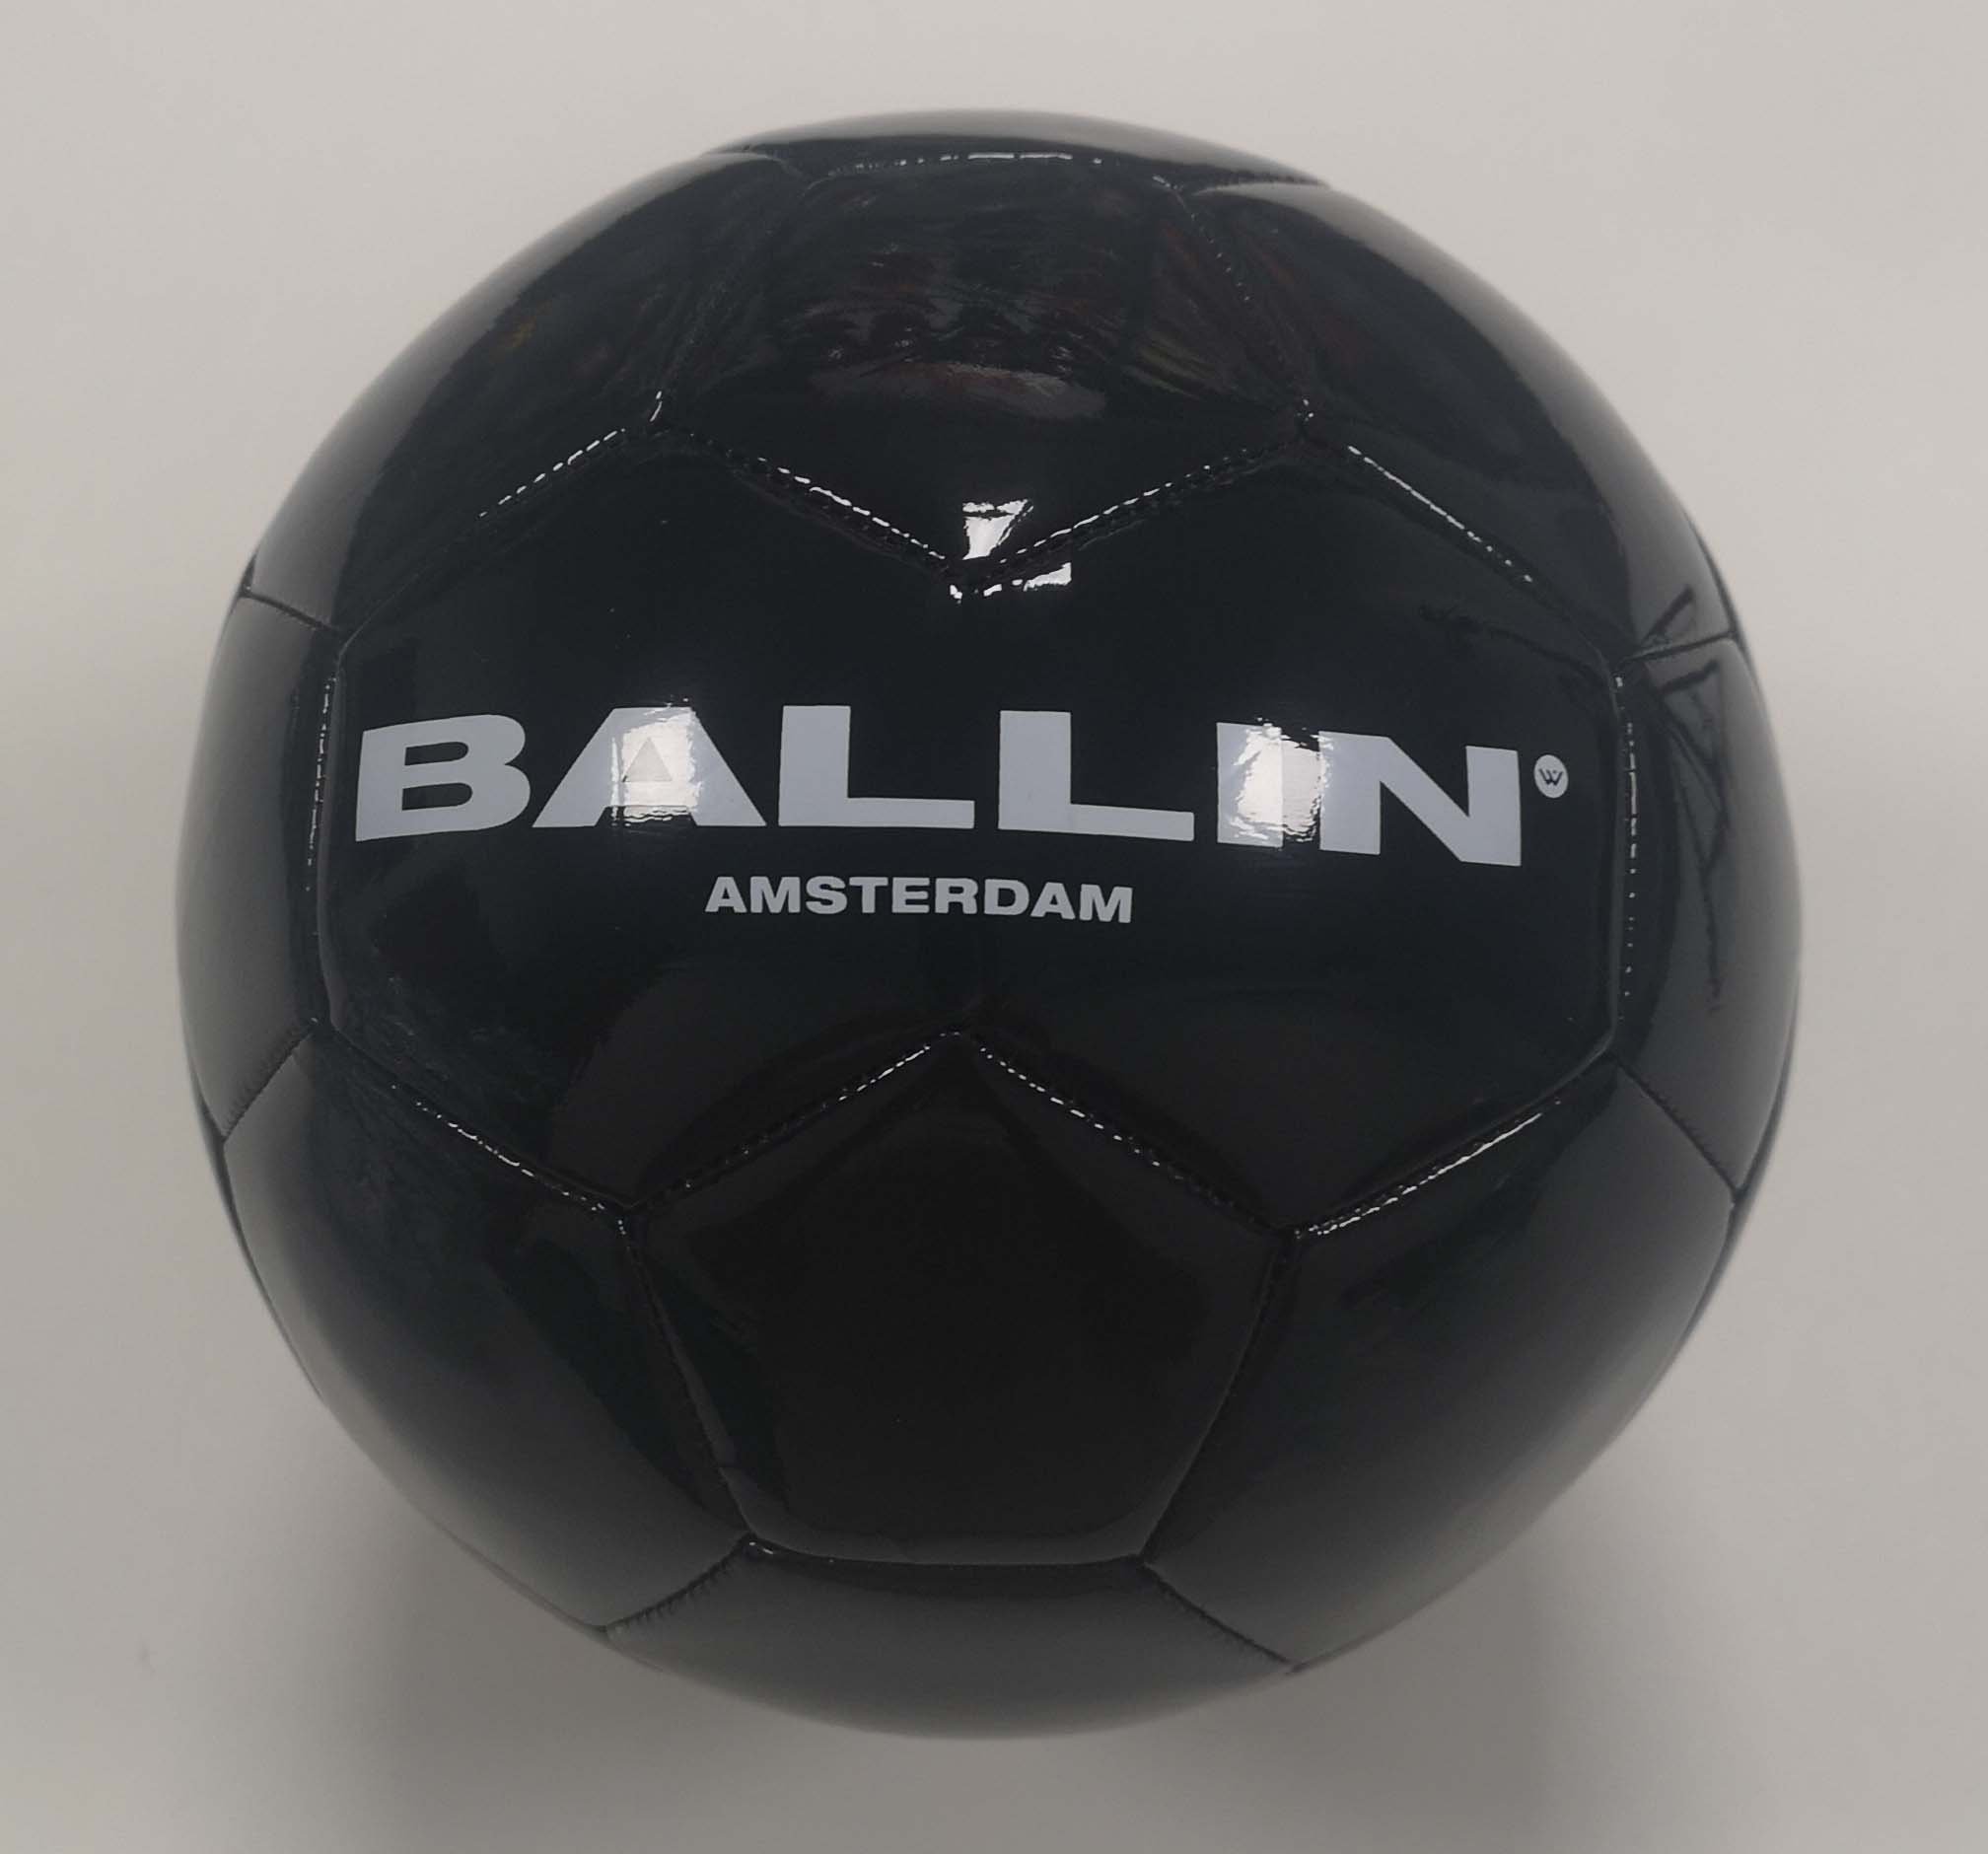 Hand-stitched custom soccer ball for durability